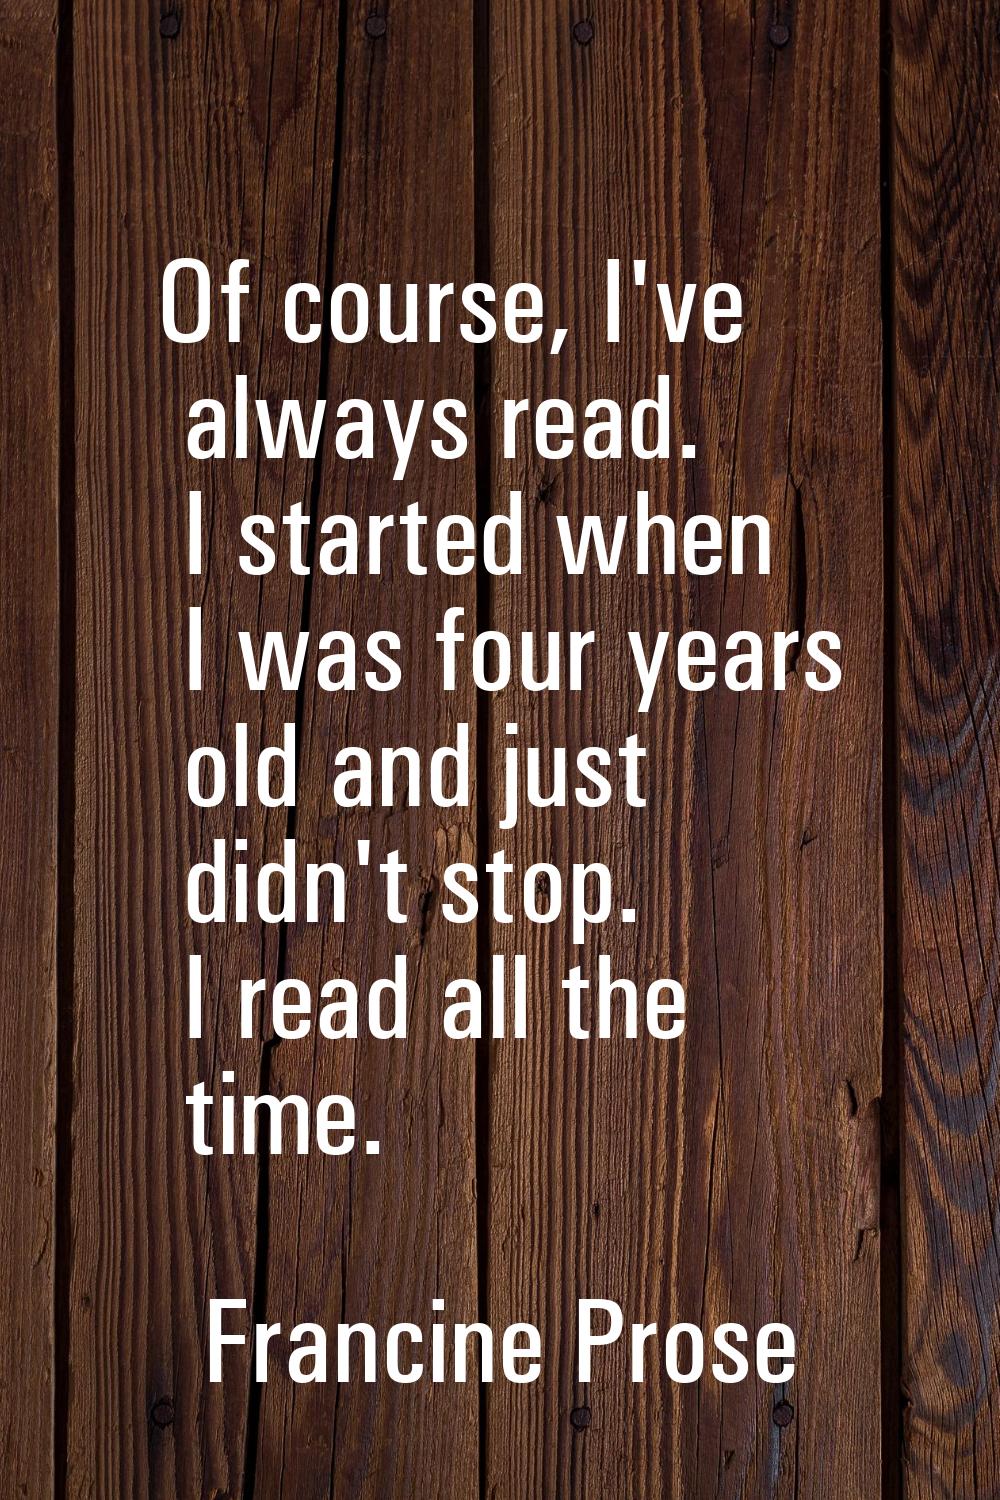 Of course, I've always read. I started when I was four years old and just didn't stop. I read all t